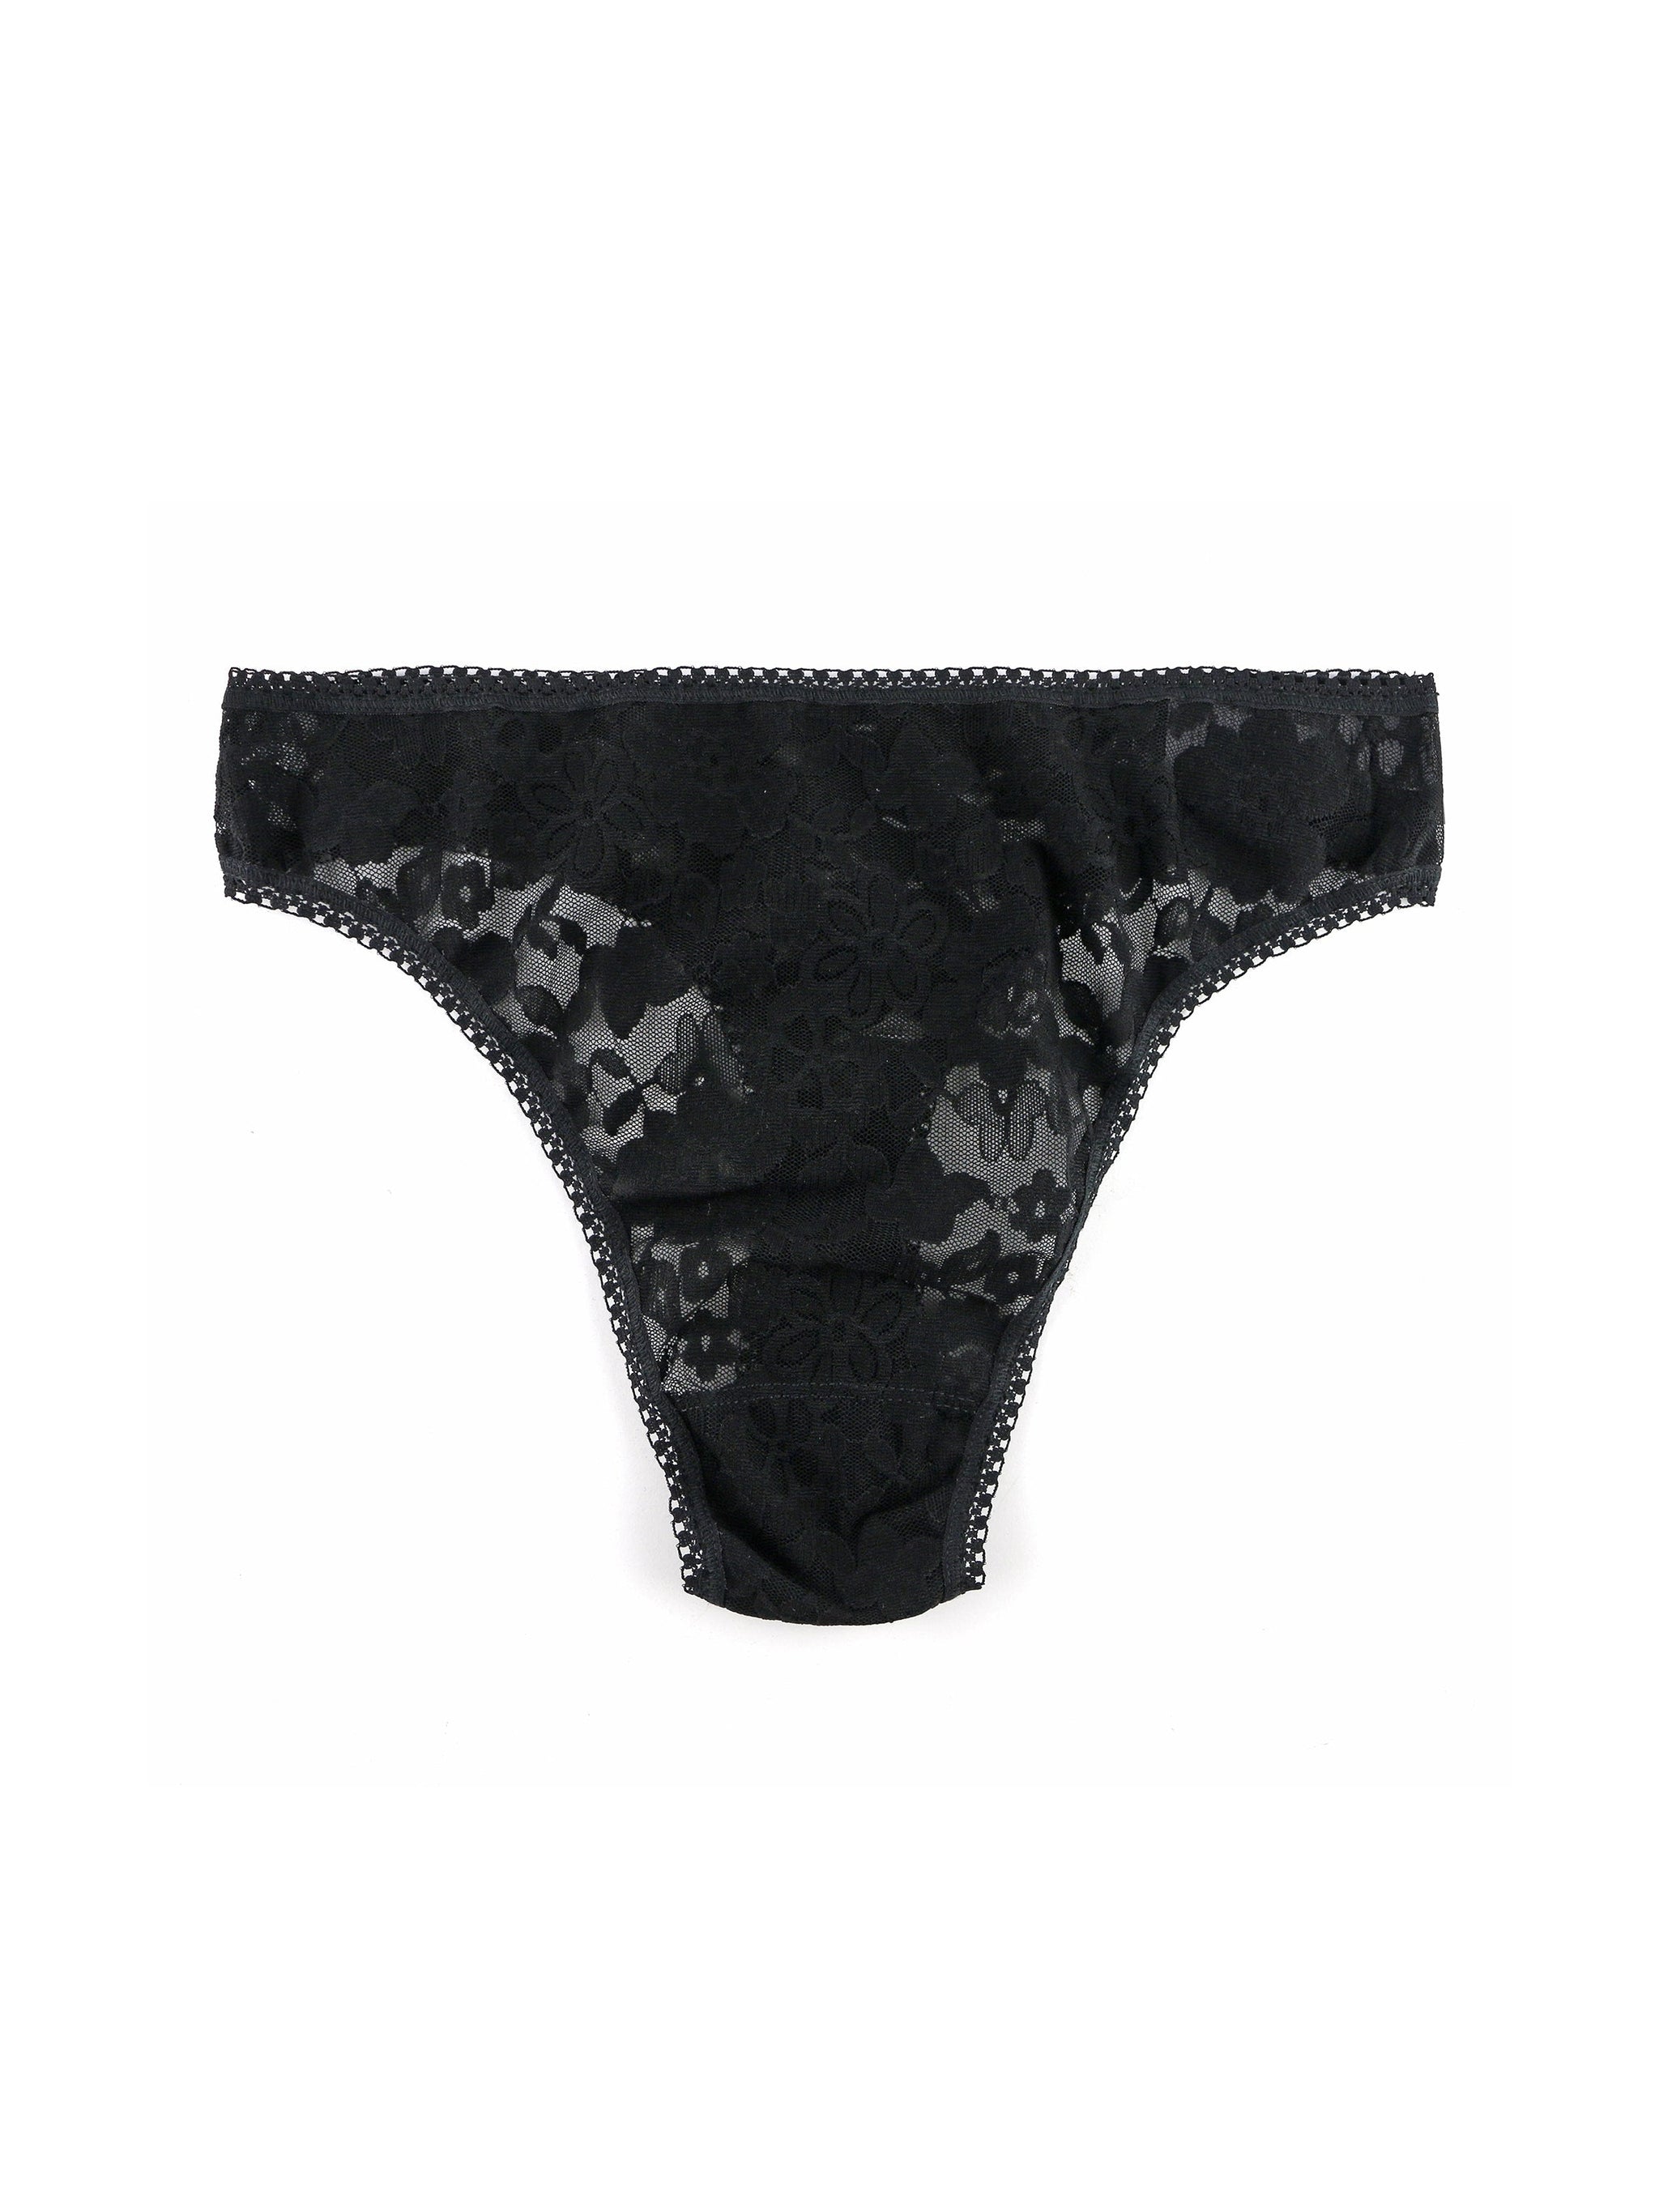 Daily Lace High Cut Thong-Hanky Panky